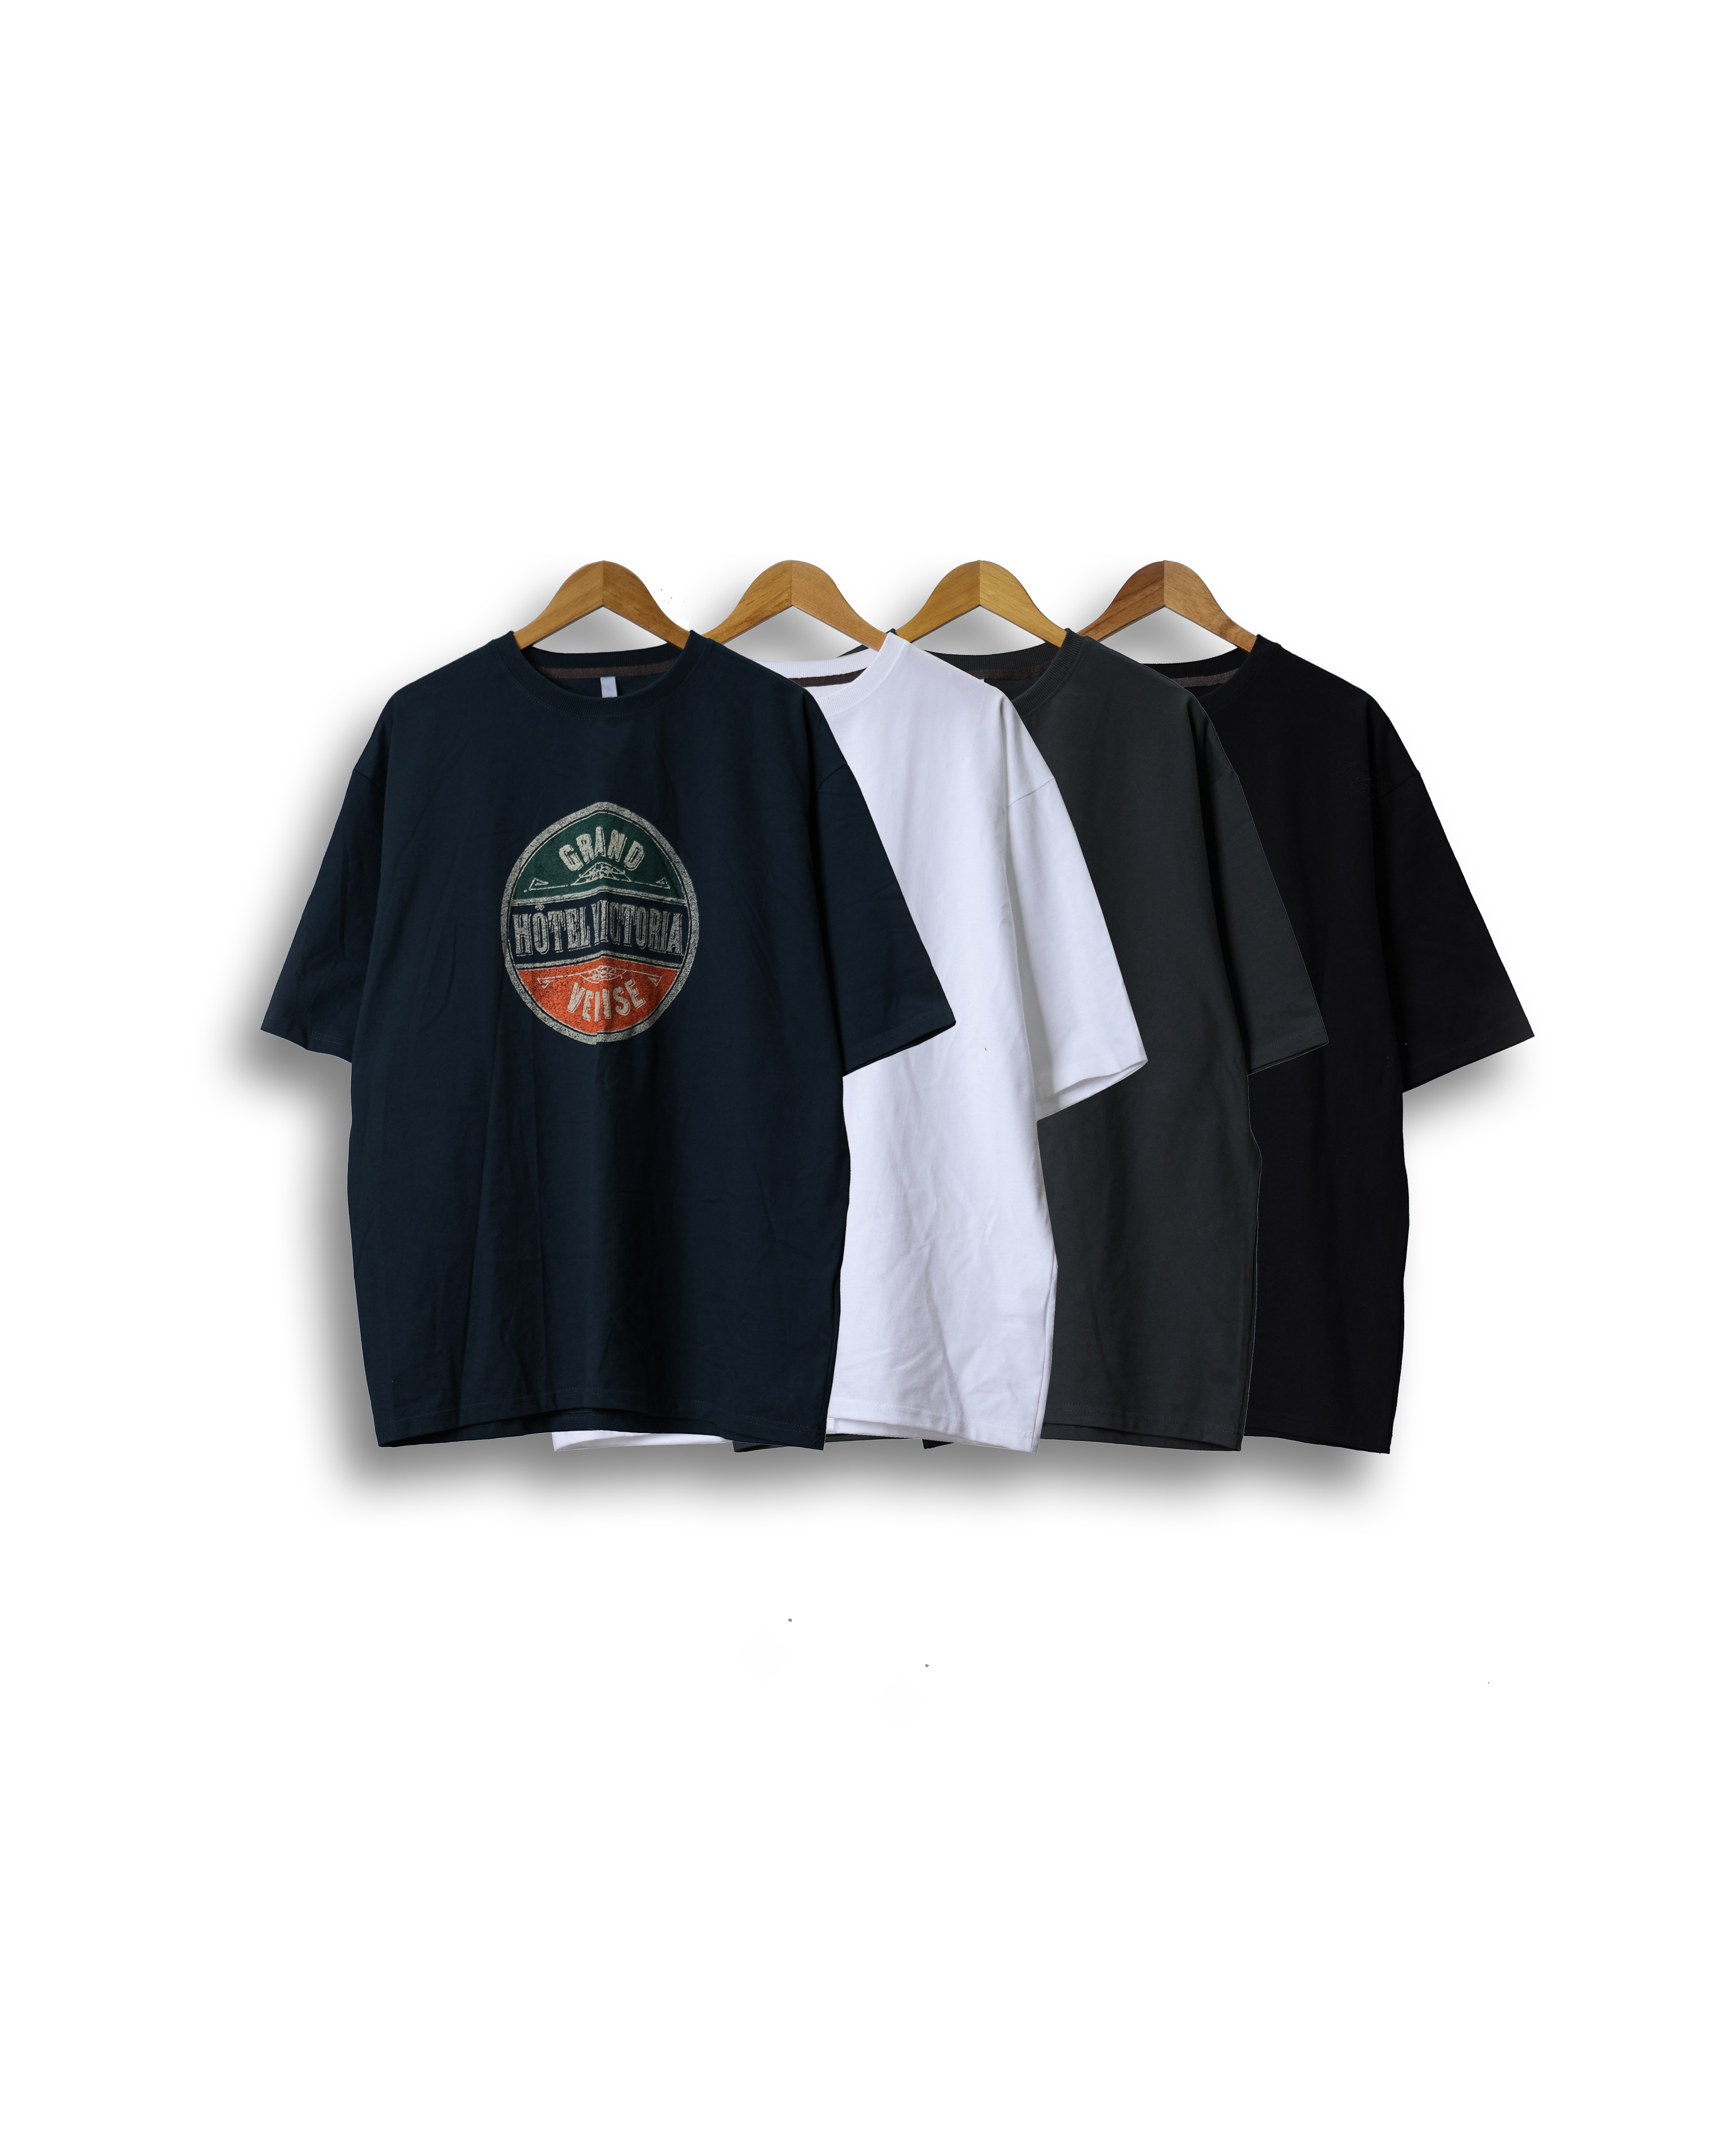 OTHER Victoria Hotel Vintage Over T Shirts (Black/Charcoal/Navy/White) - 8차 리오더 (네이비 5/10 배송예정)